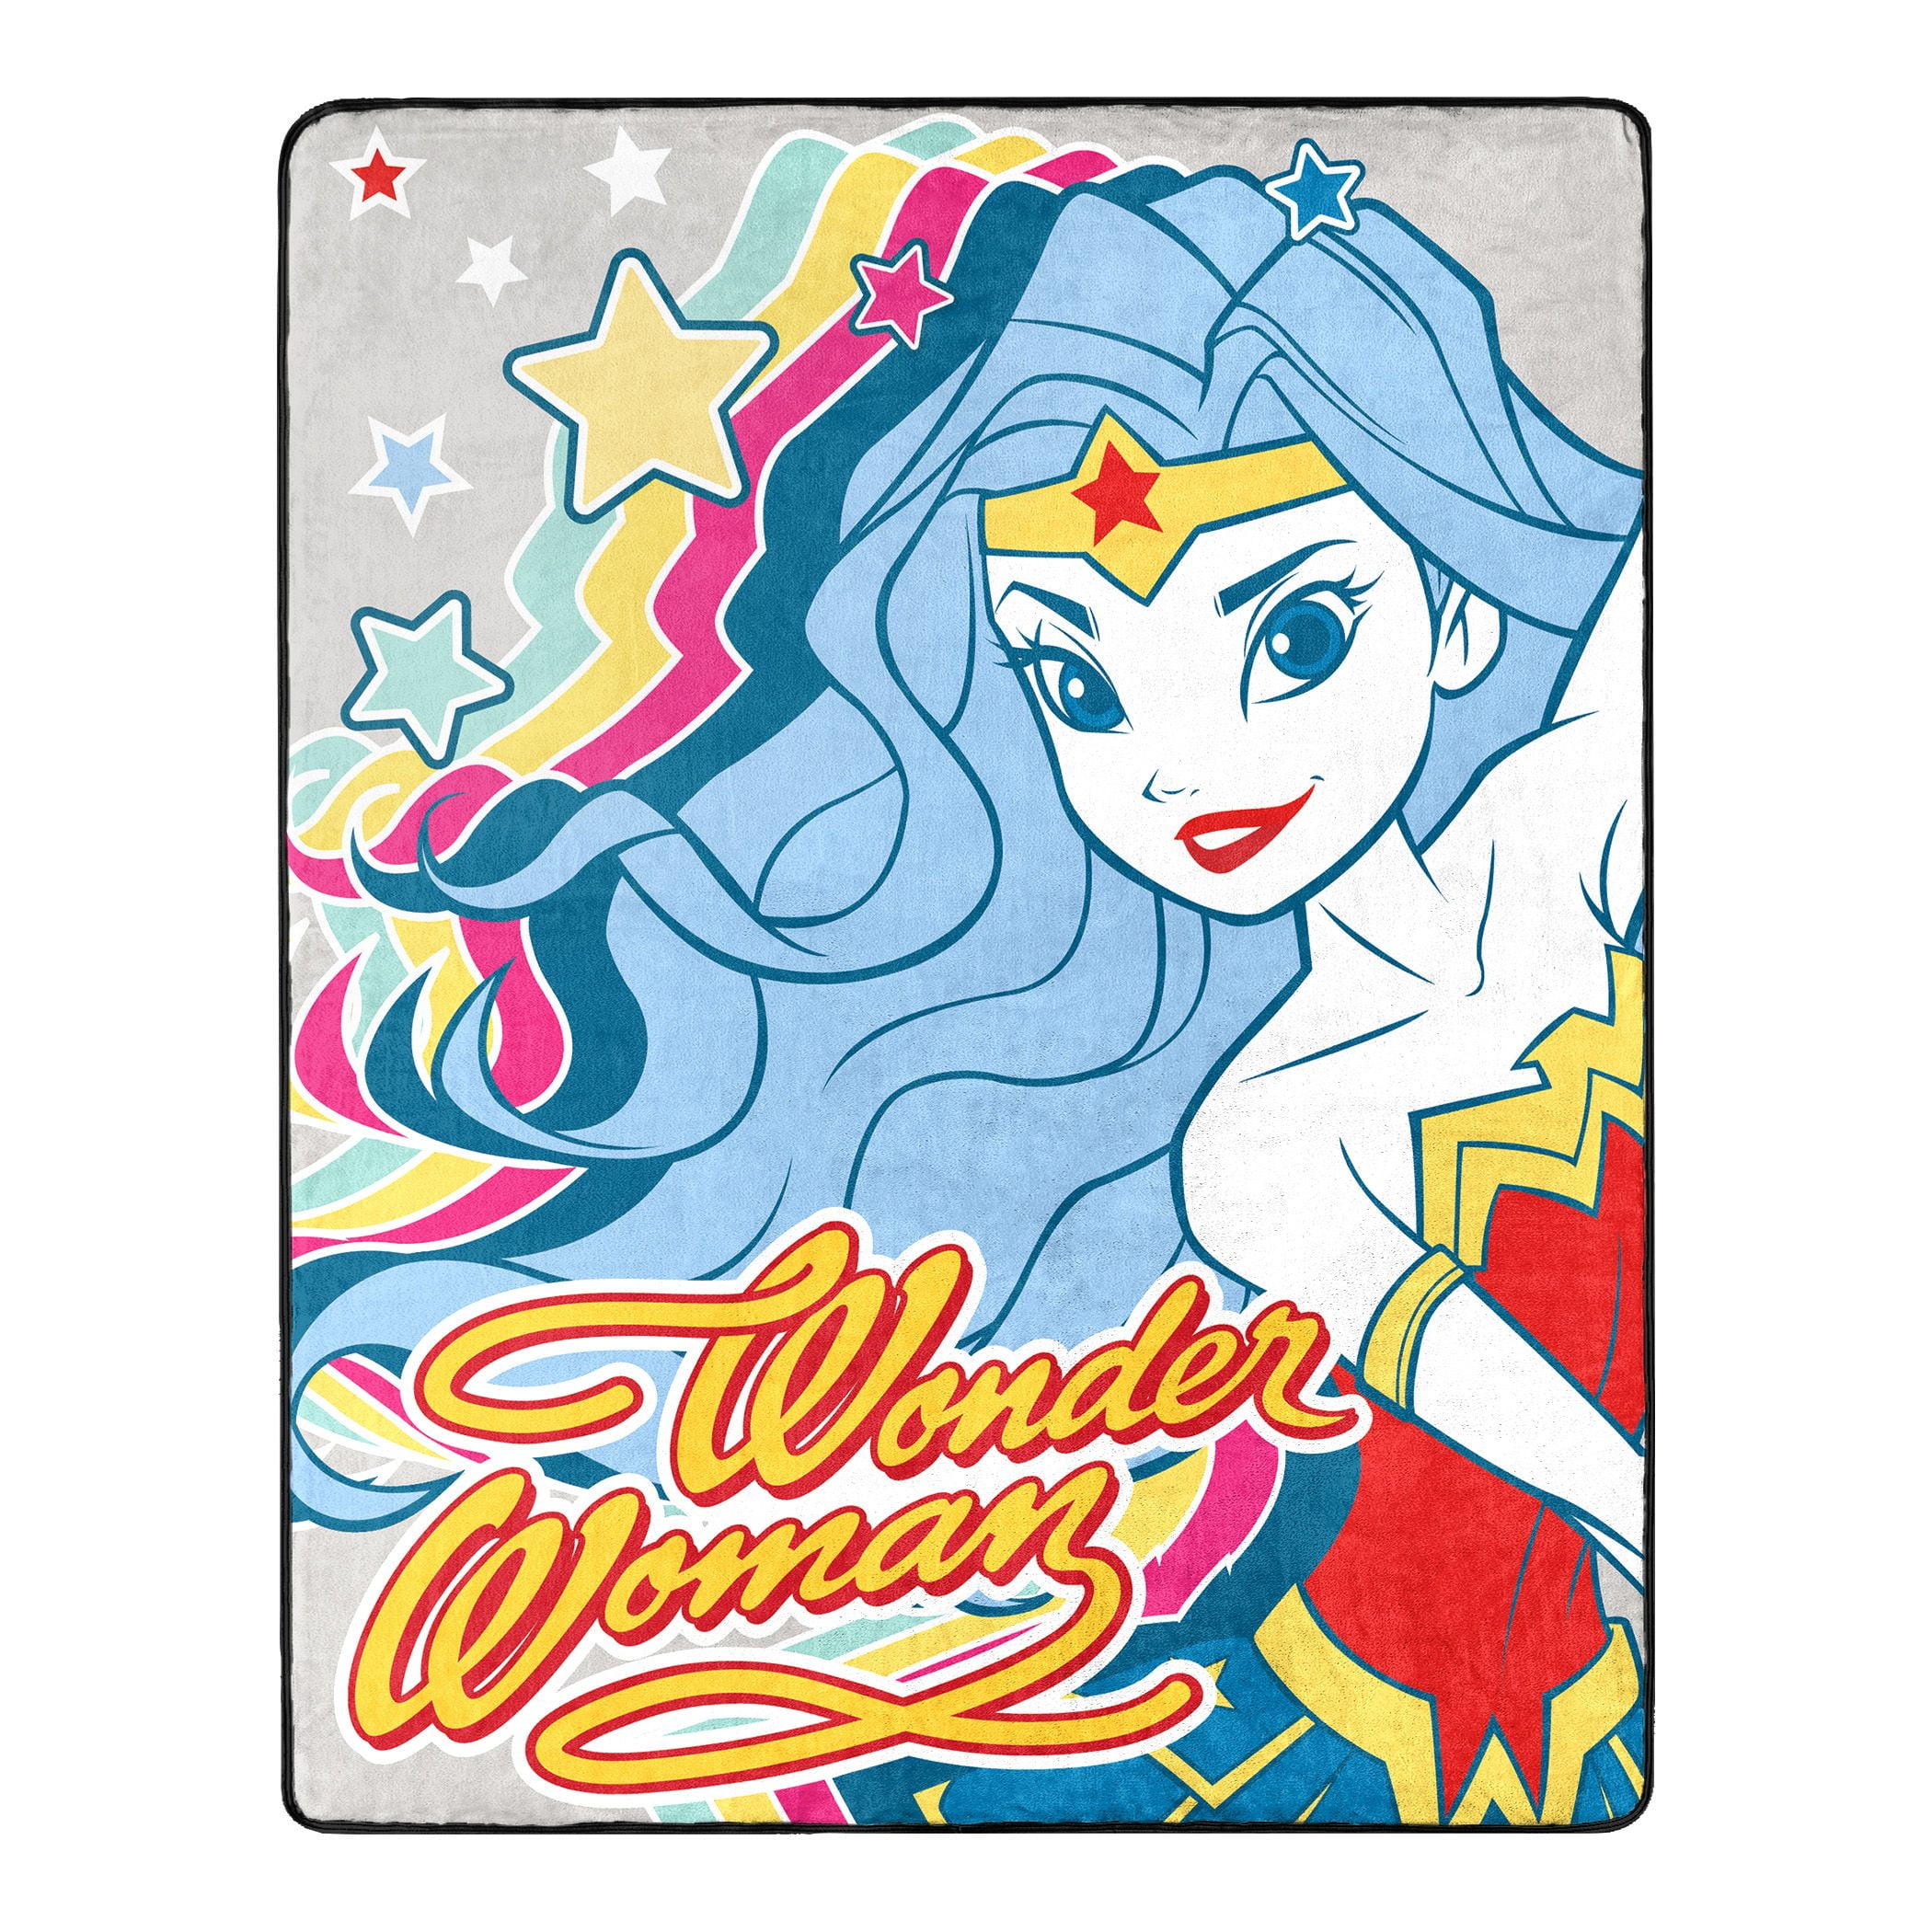 Details about   NWT Wonder Woman Silky Soft & Warm Throw Blanket 40 in x 50 in PURPLE 